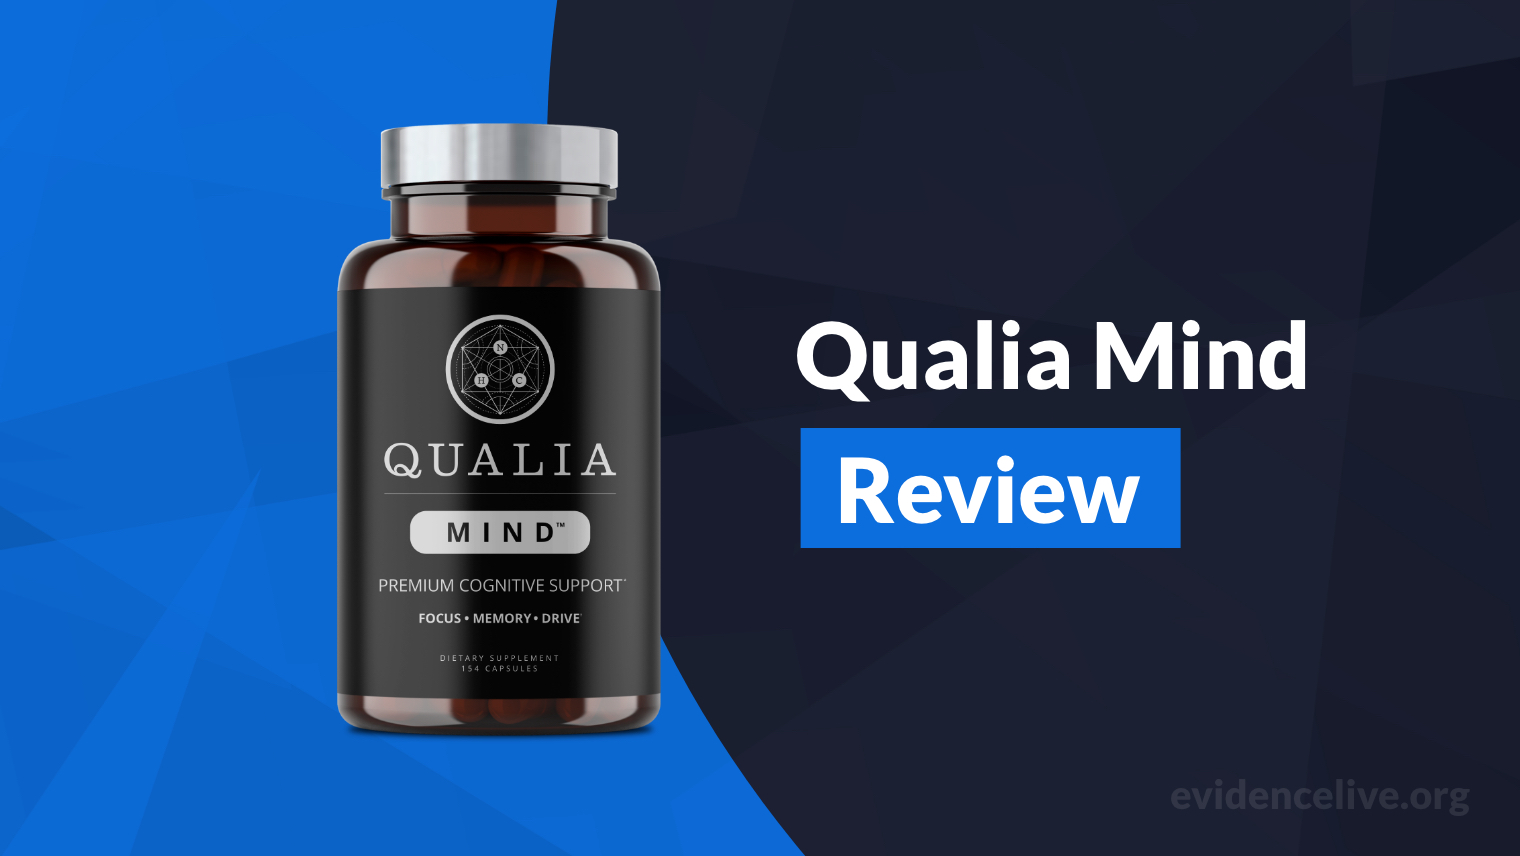 Qualia Mind Review: Ingredients, Benefits, and Side Effects